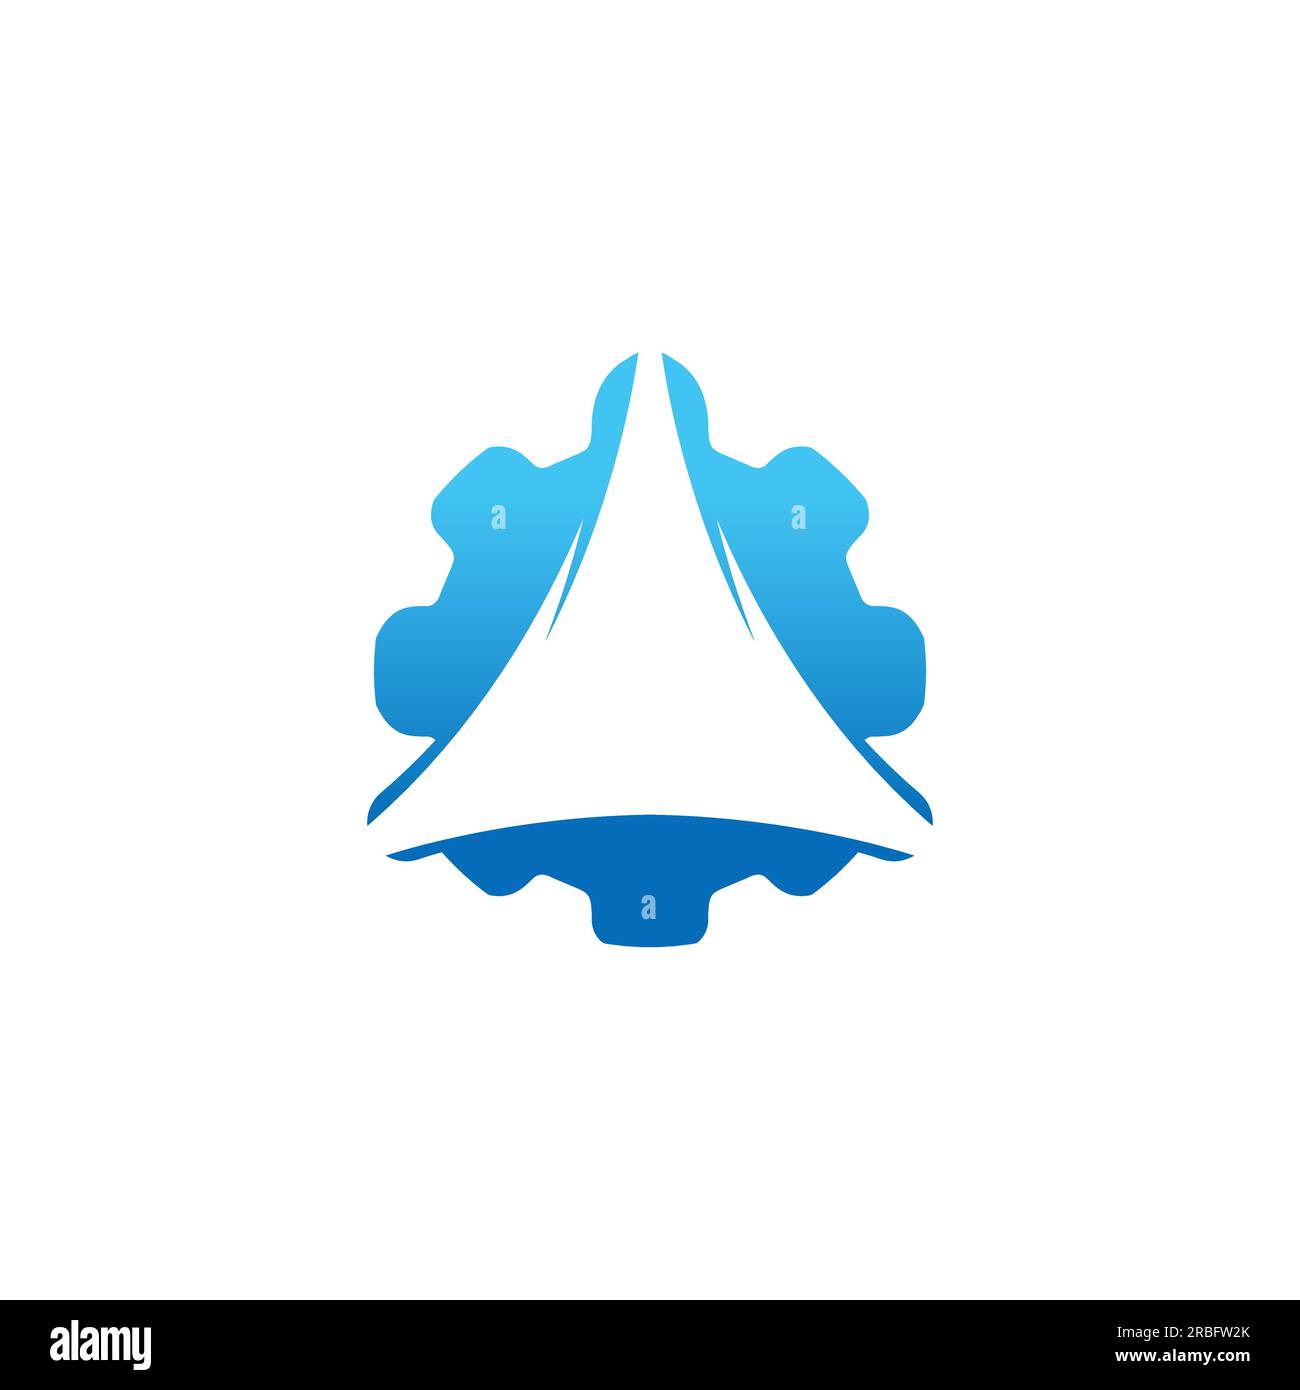 Triangle Trinity and gear icon vector logo design template download.EPS 10 Stock Vector